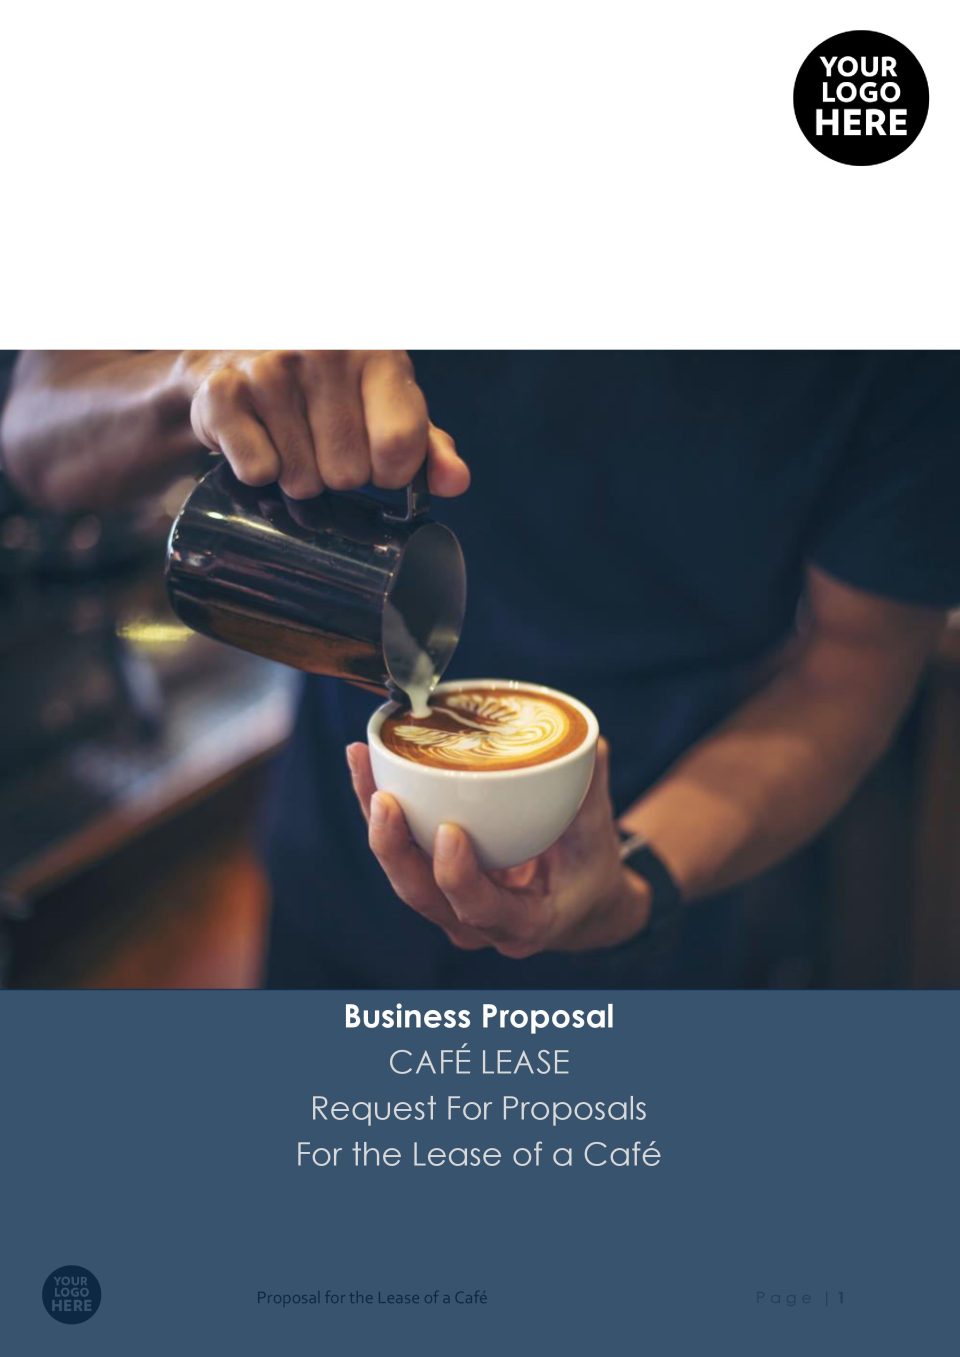 Business Proposal CAFE LEASE Request For Proposals For the Lease of a Cafe Template 01 scaled